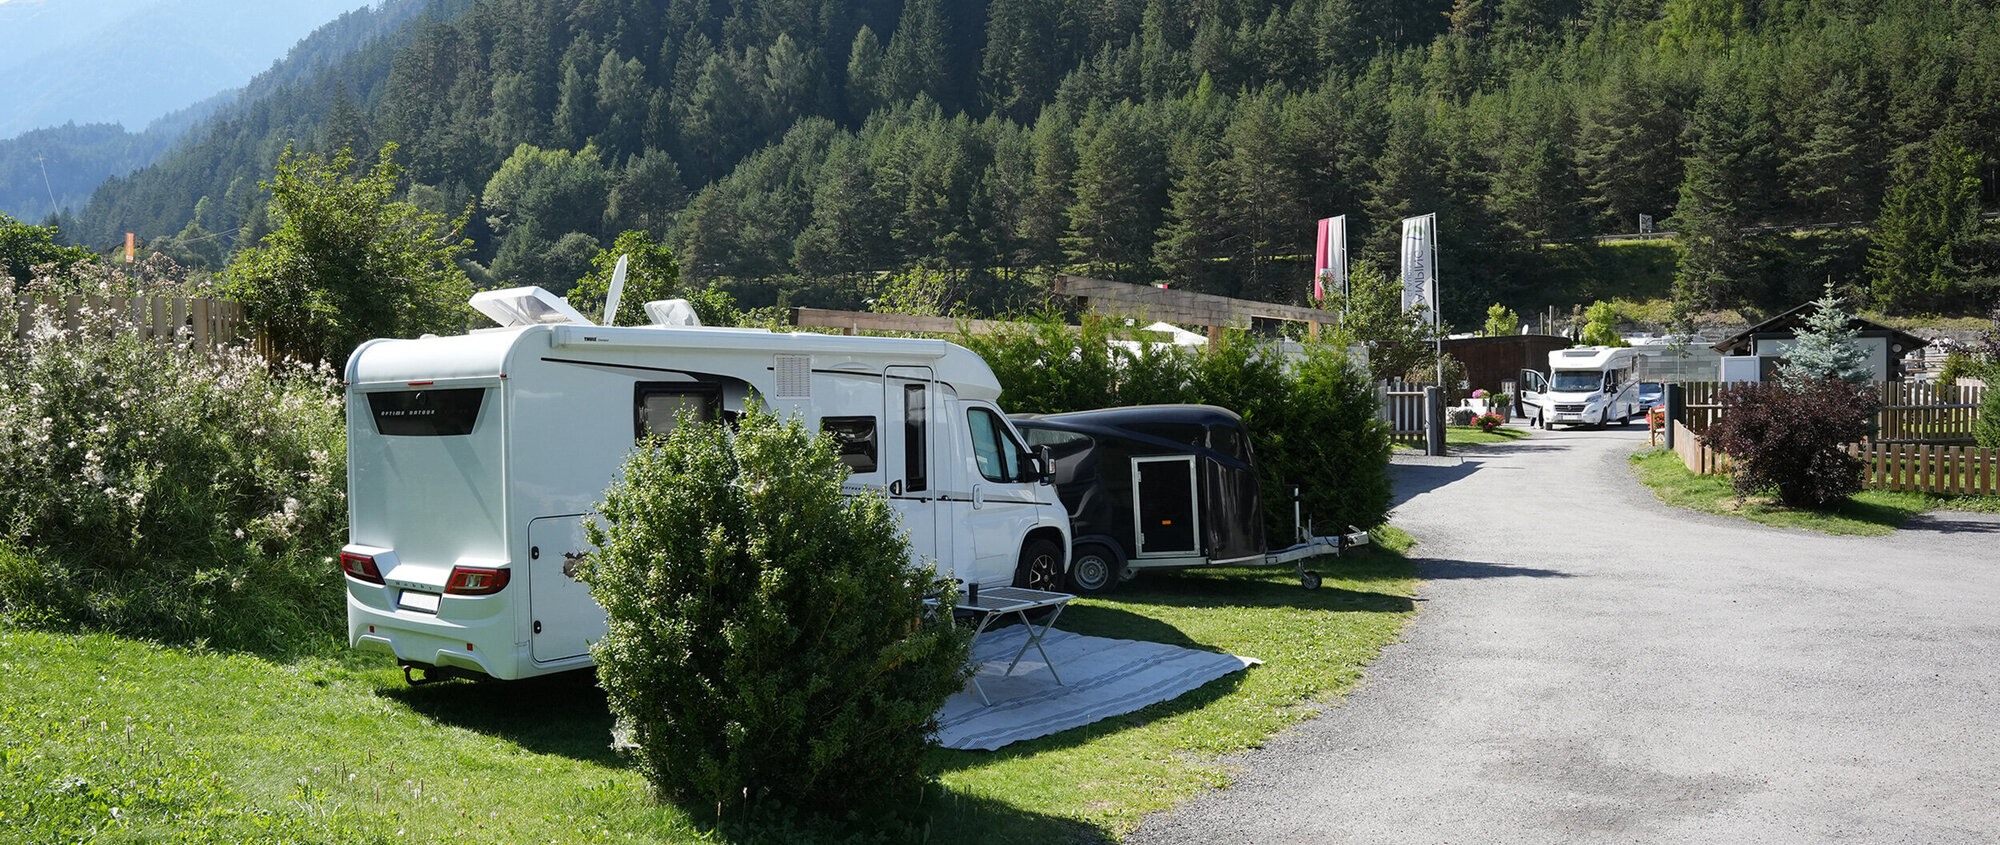  Camping Via Claudiasee in Pfunds